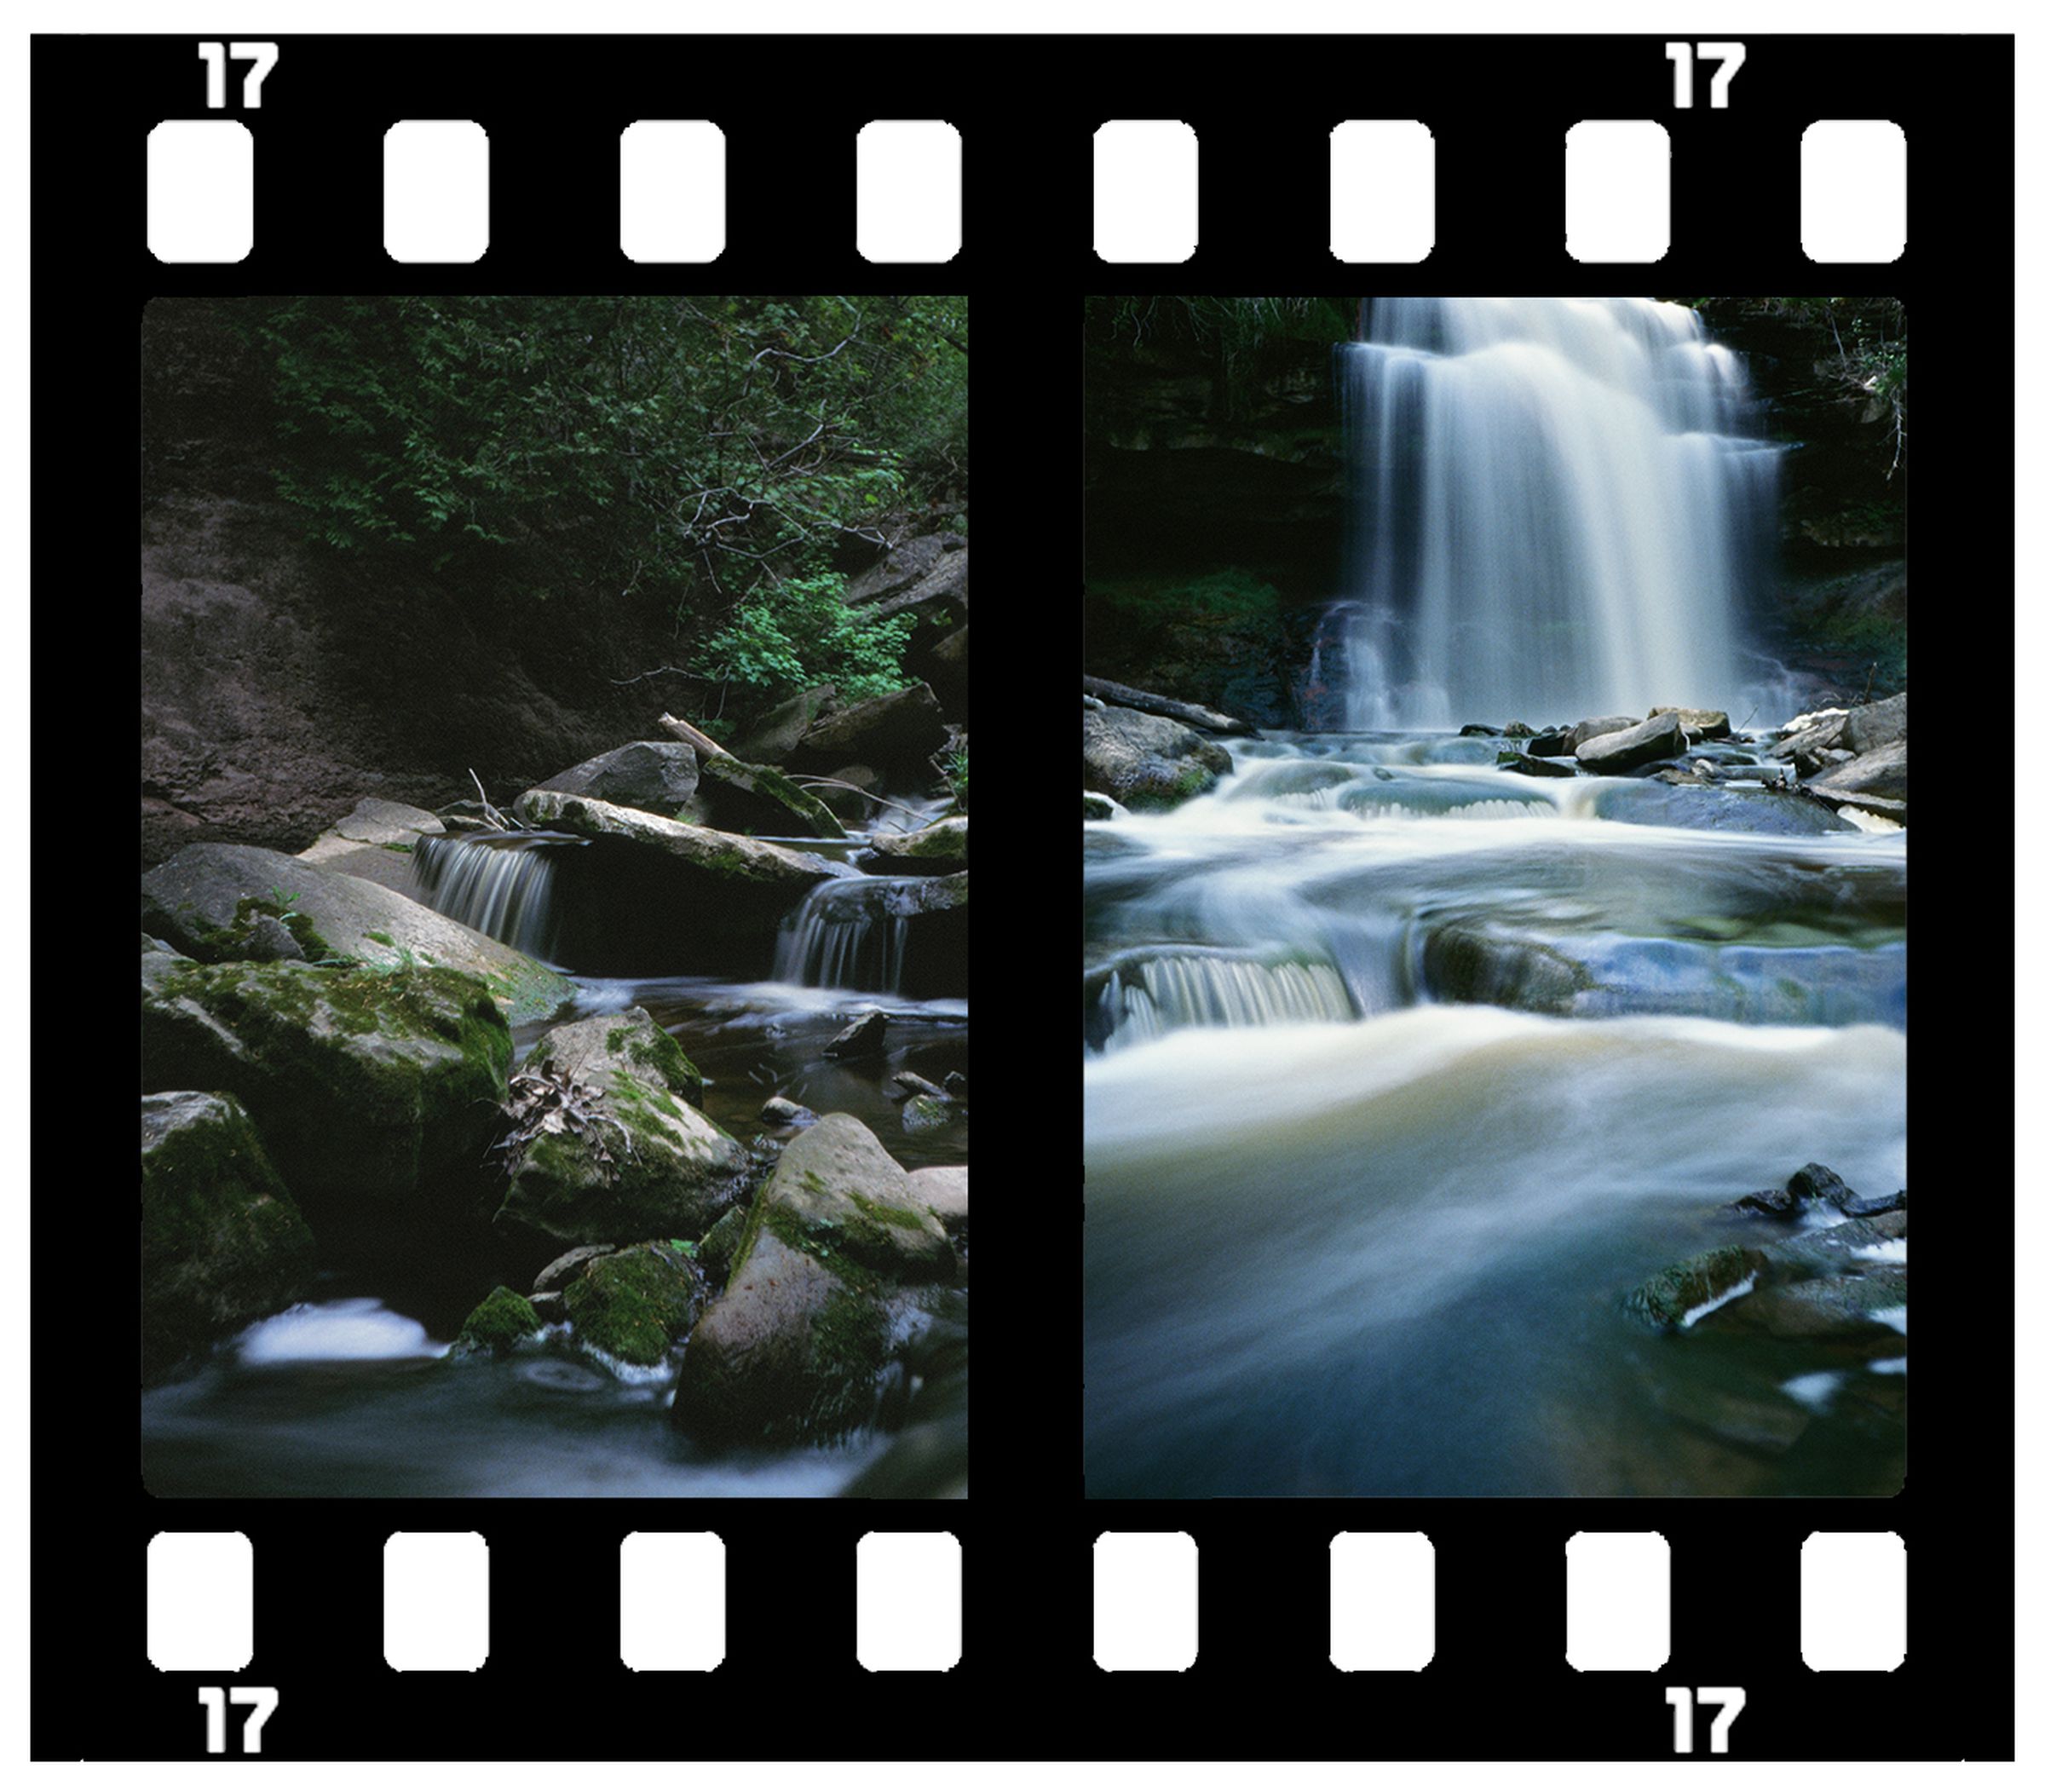 A simulation of how the Pentax 17’s half-frame images are captured on a segment of 35mm film.